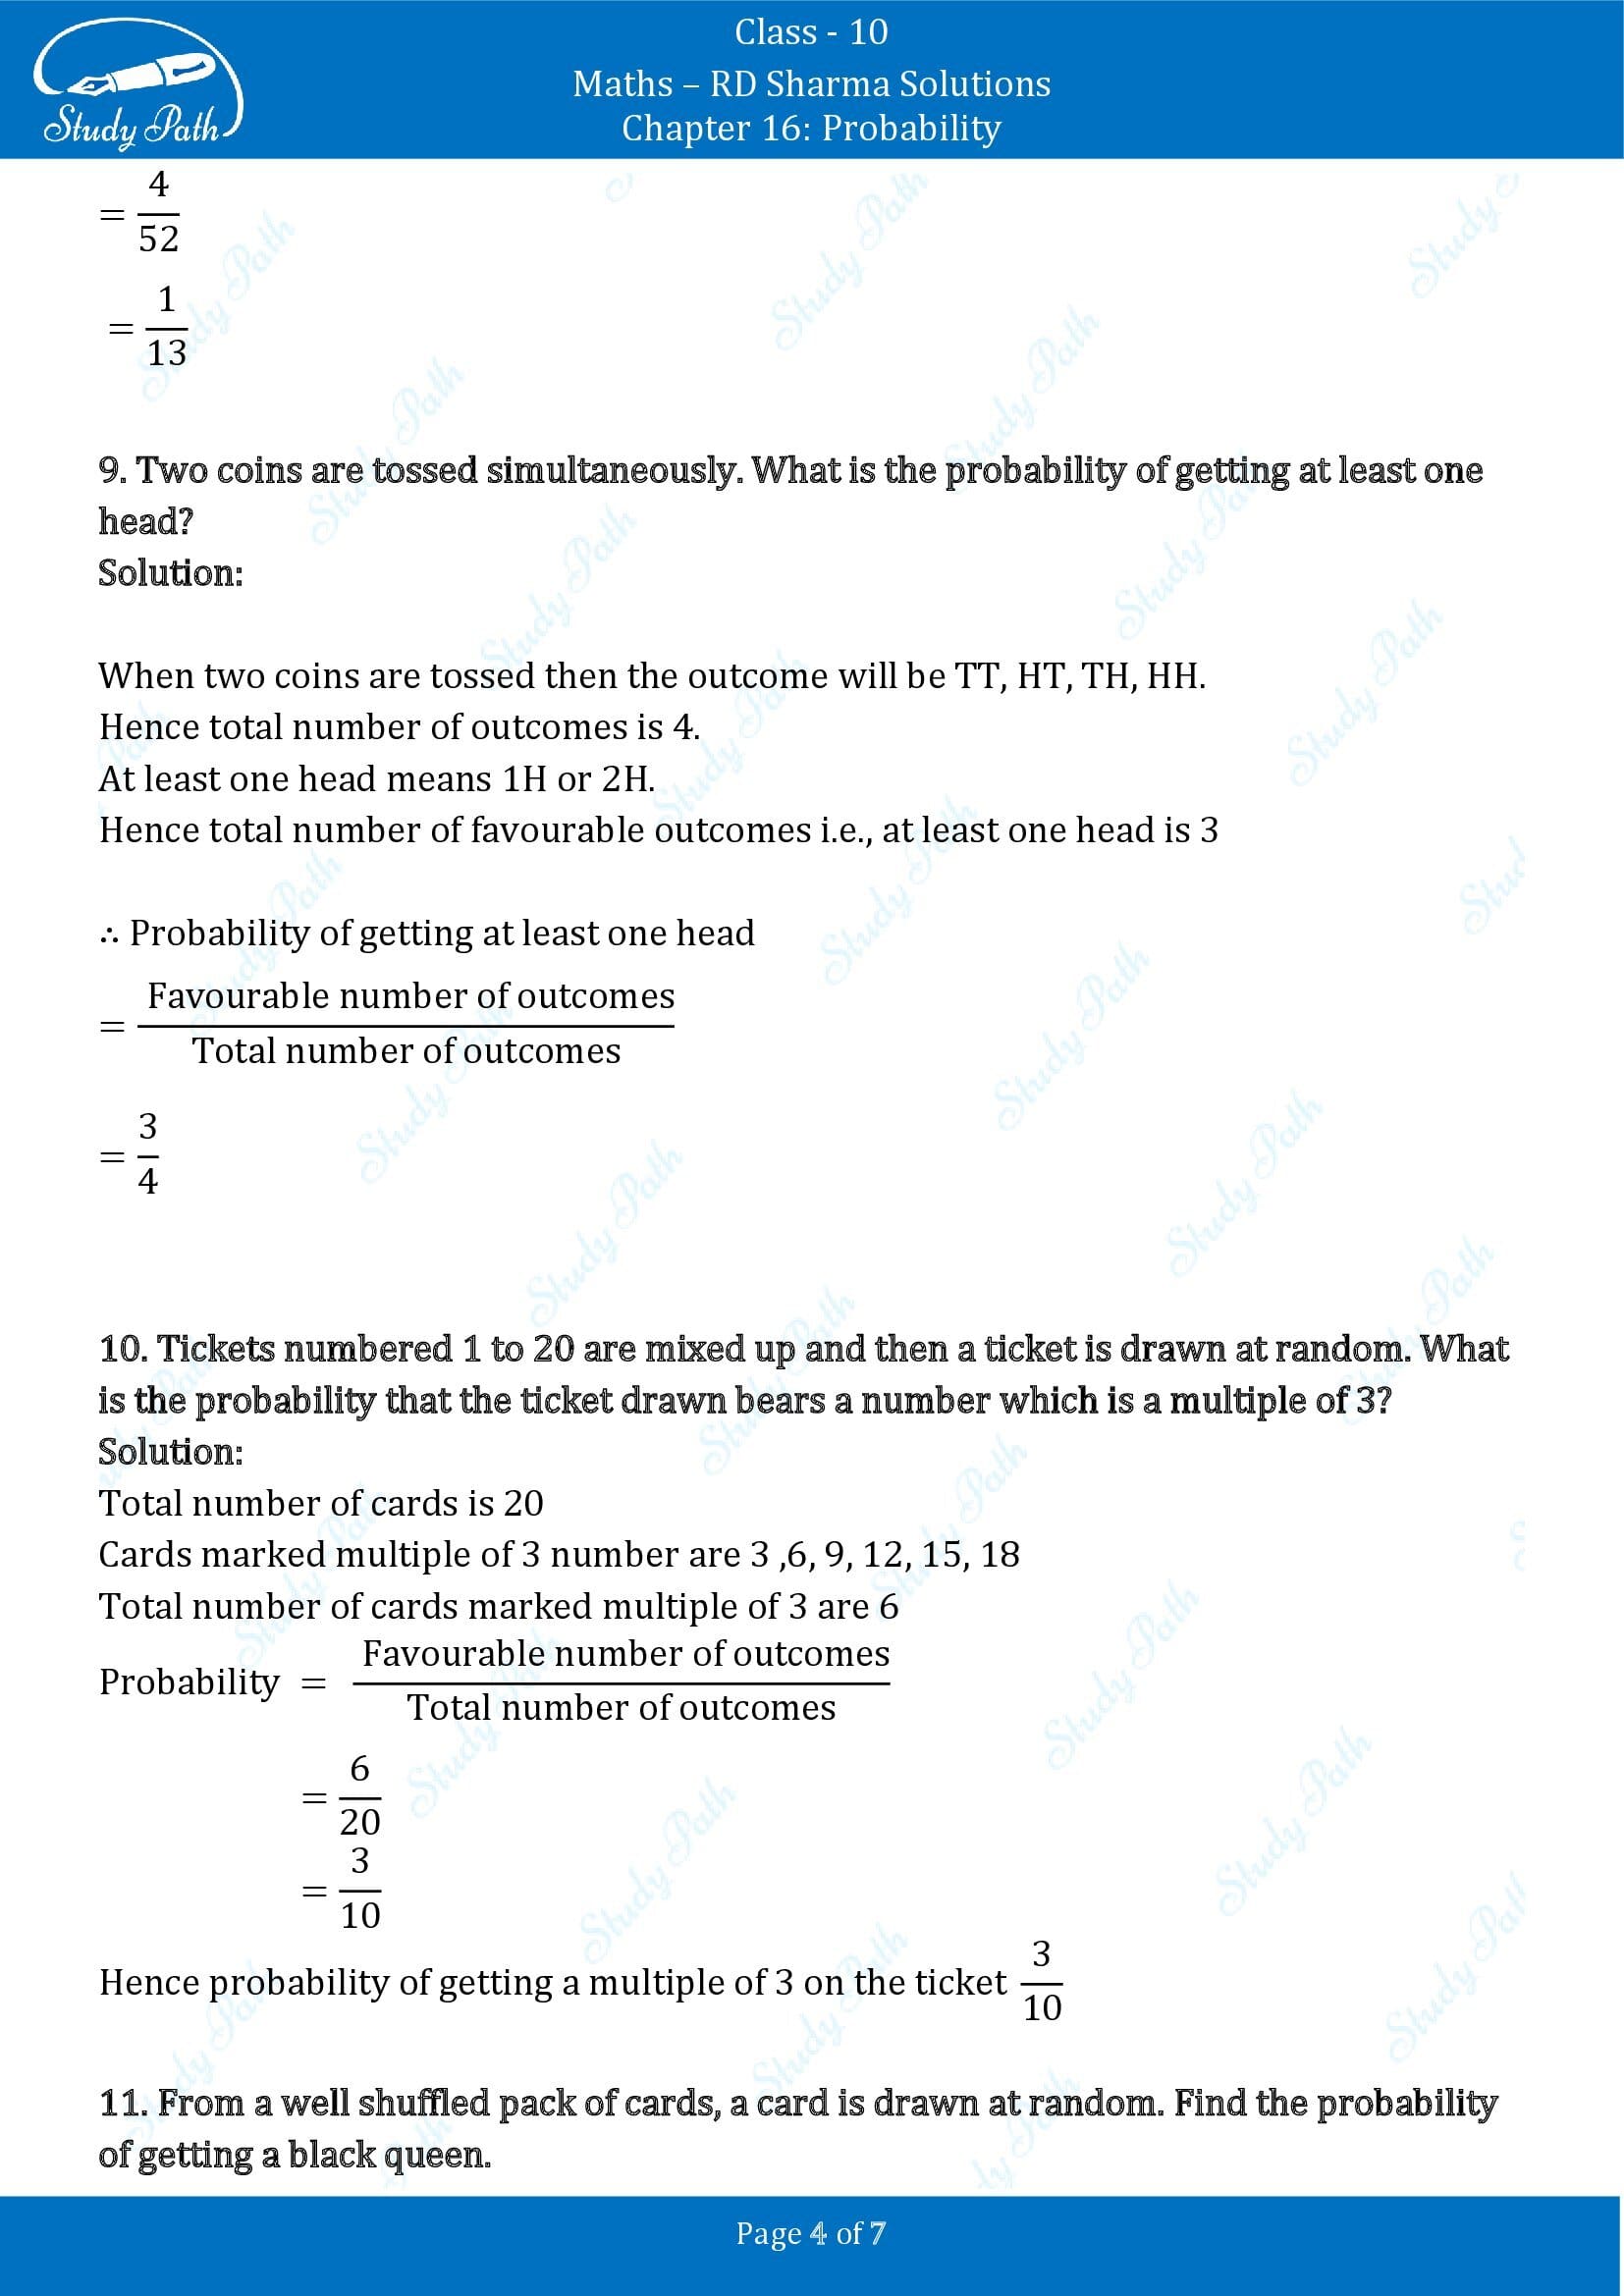 RD Sharma Solutions Class 10 Chapter 16 Probability Very Short Answer Type Questions VSAQs 00004